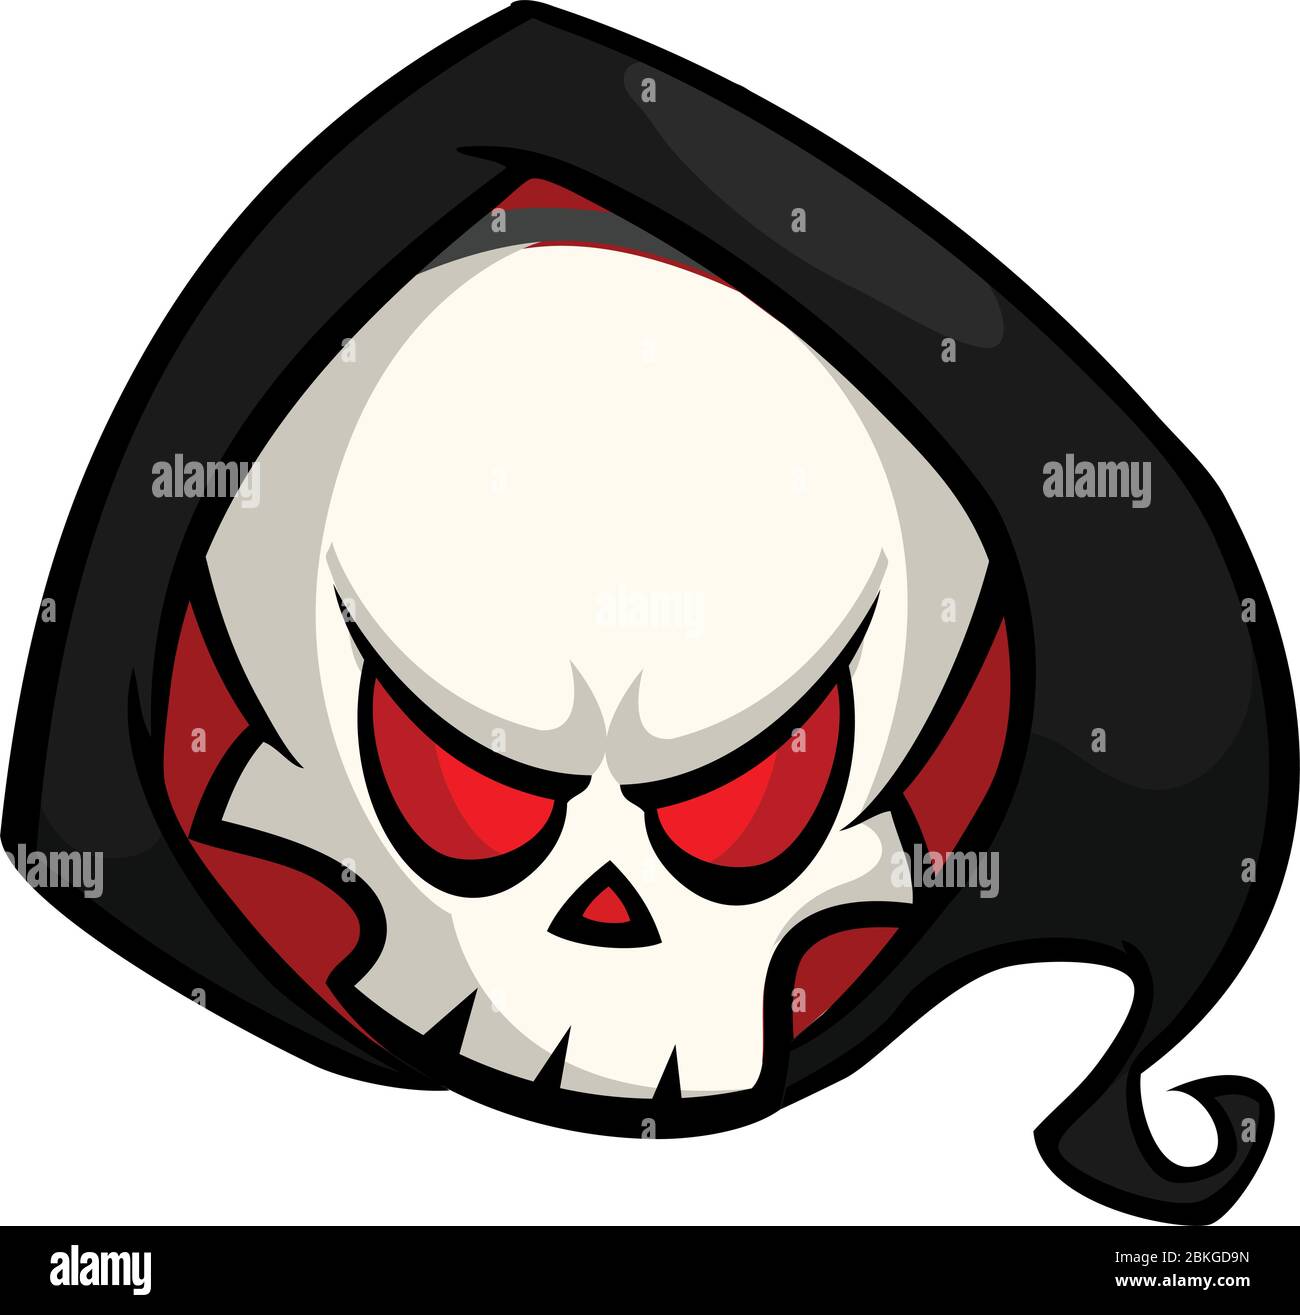 Featured image of post Cool Skull Avatar : Free download no attribution required high quality images.